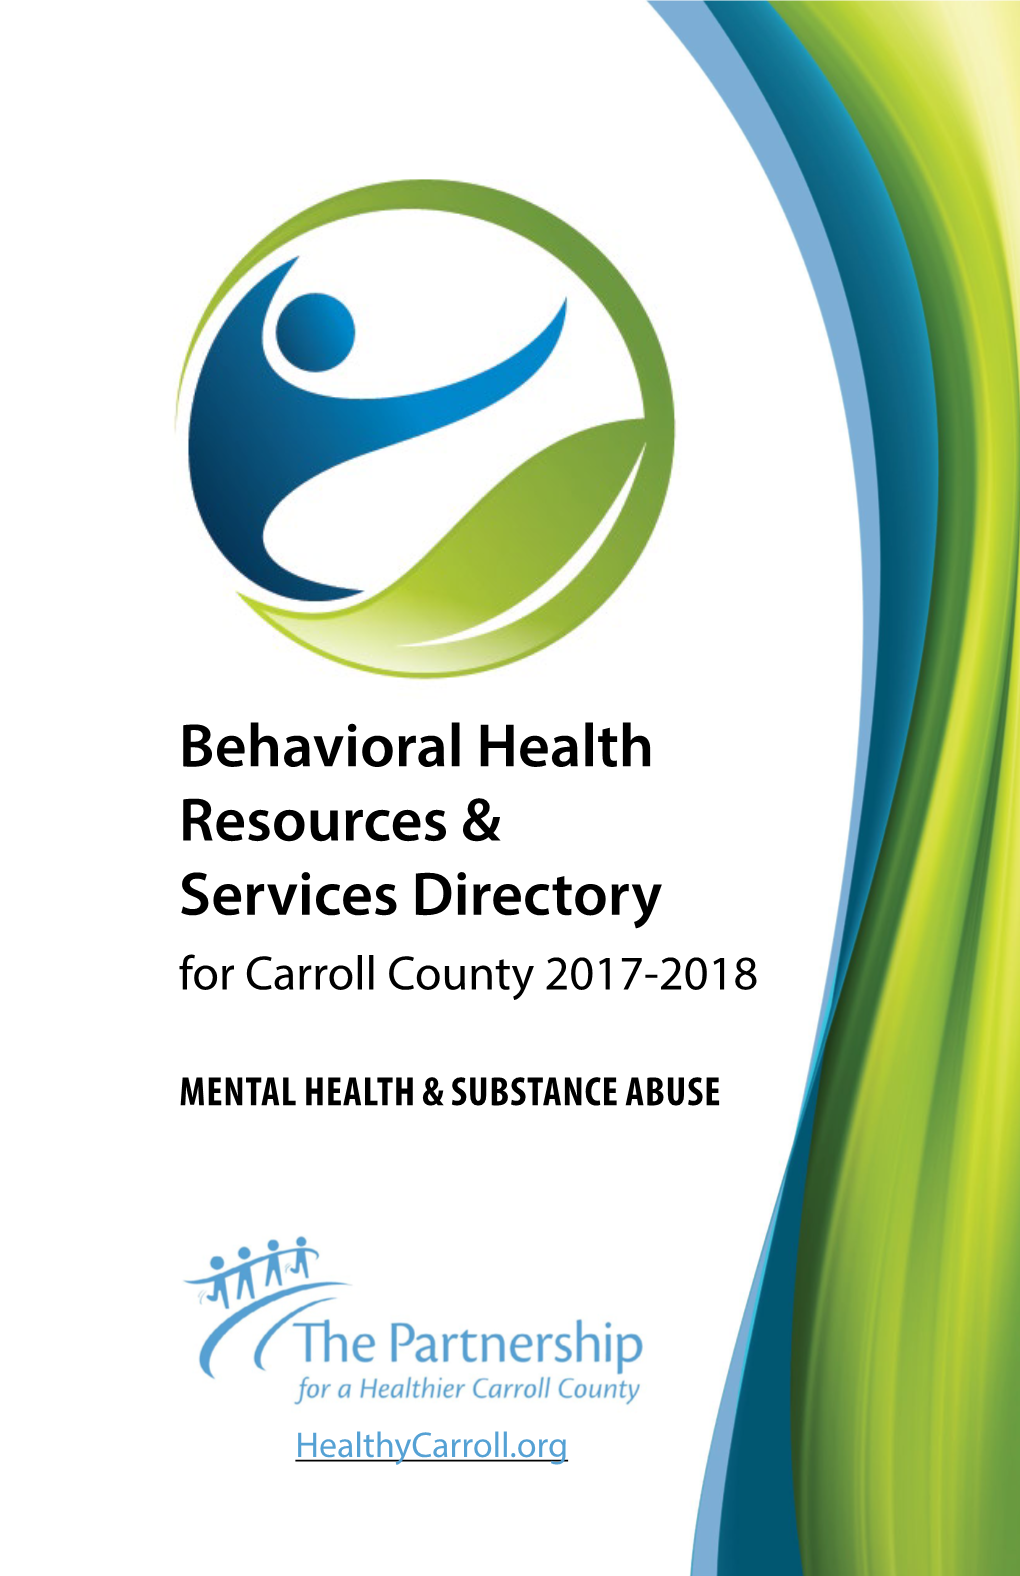 Behavioral Health Resources & Services Directory